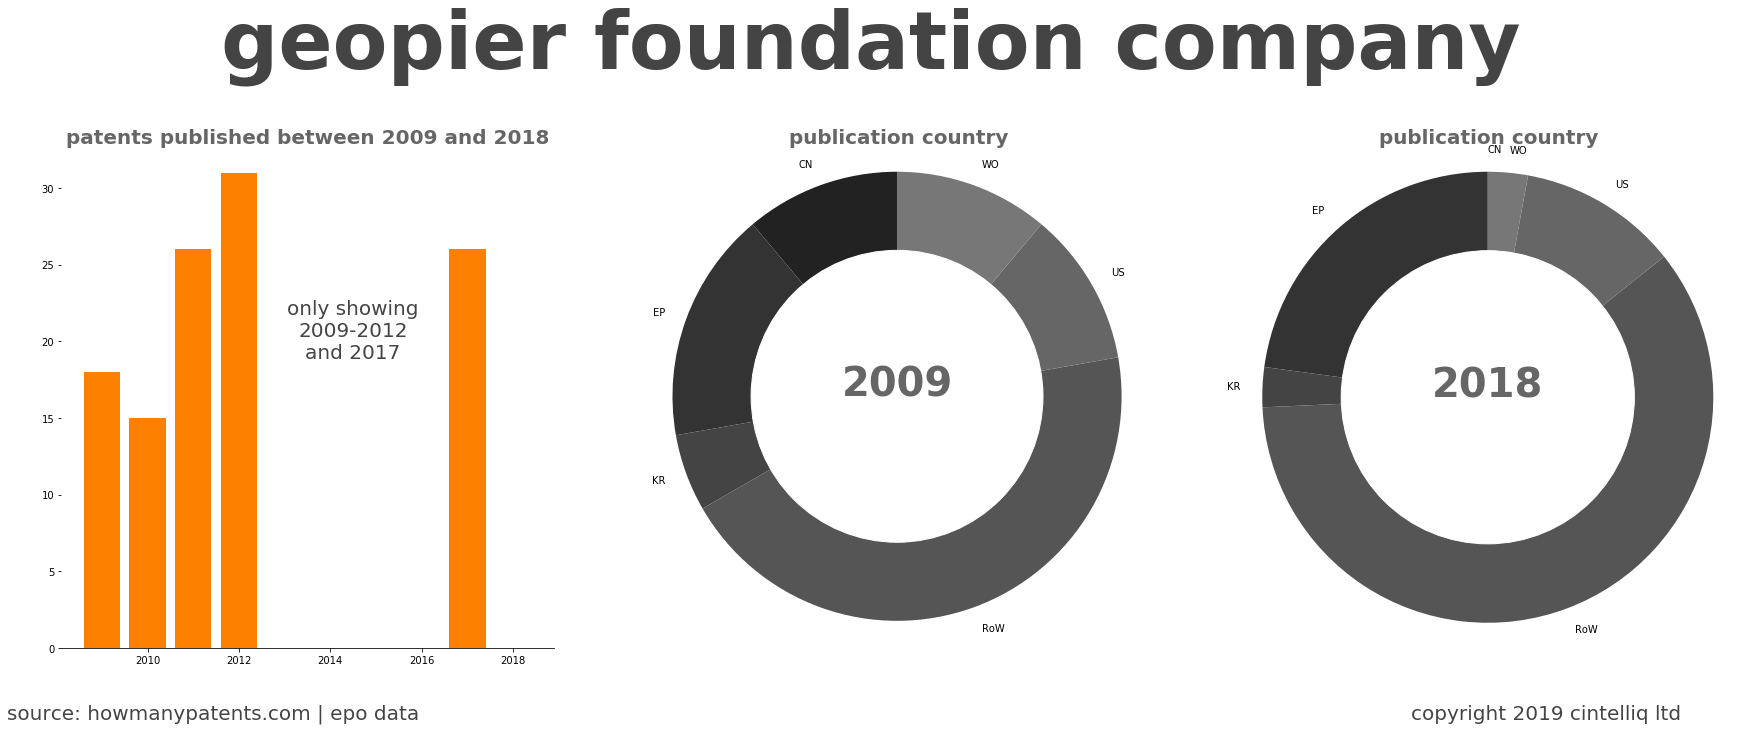 summary of patents for Geopier Foundation Company